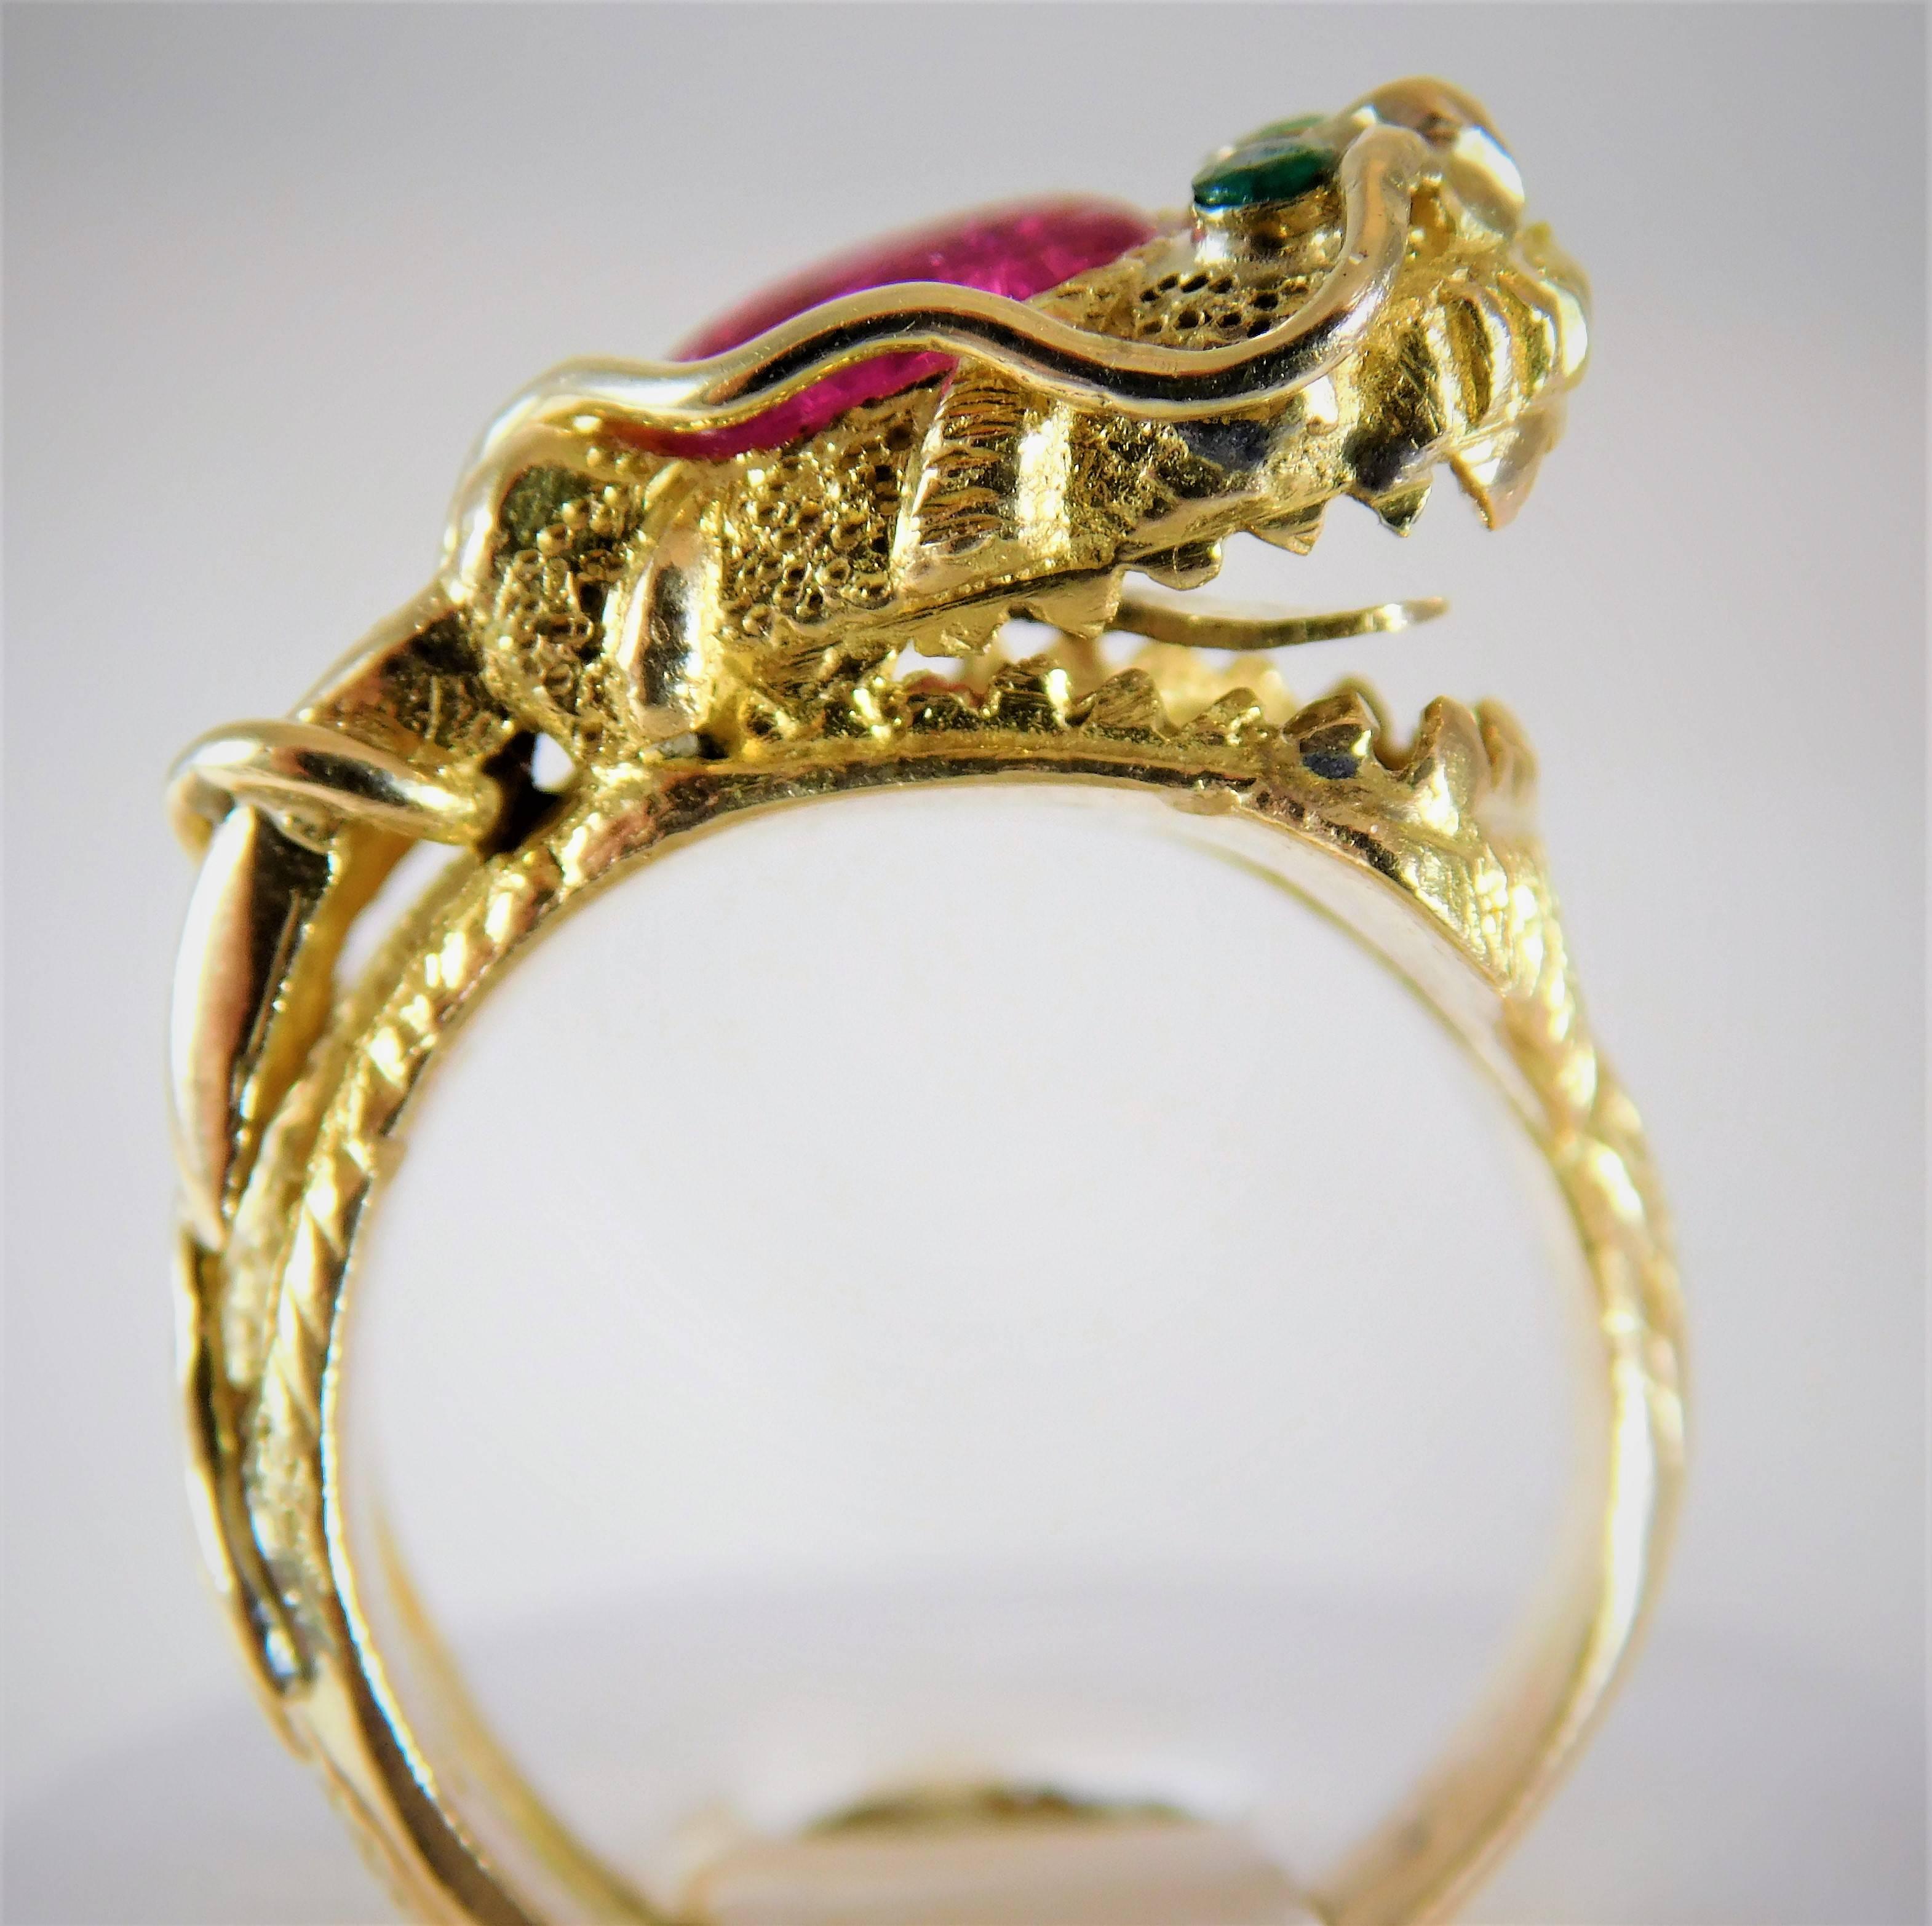 Byzantine Handcrafted 14 Karat Gold Ruby and Emerald Serpentine Dragon Ring